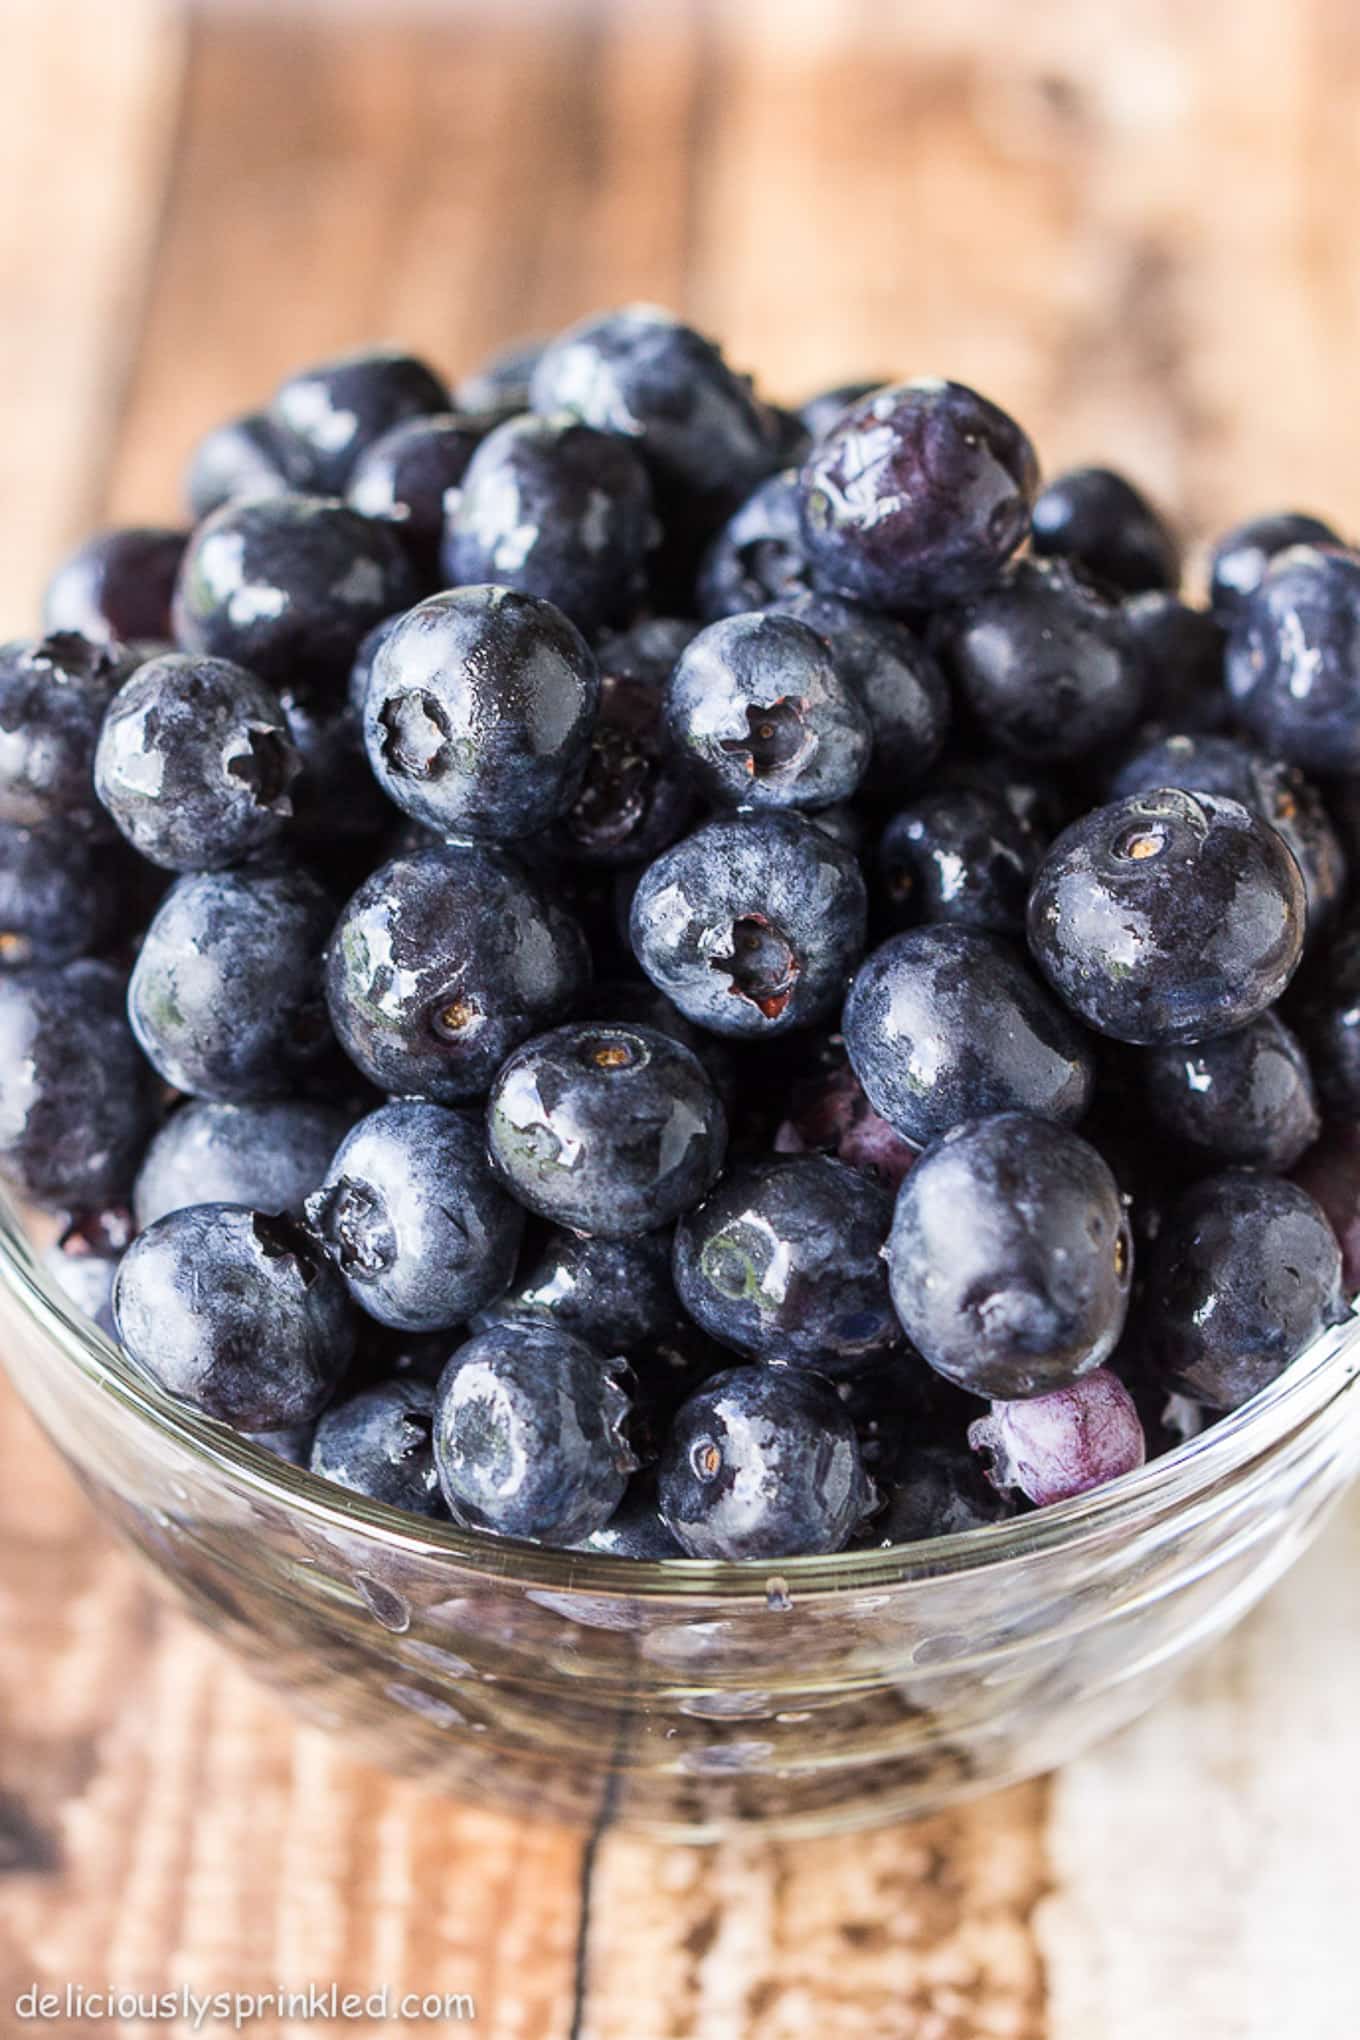 A bowl of fresh blueberries on a wooden table.